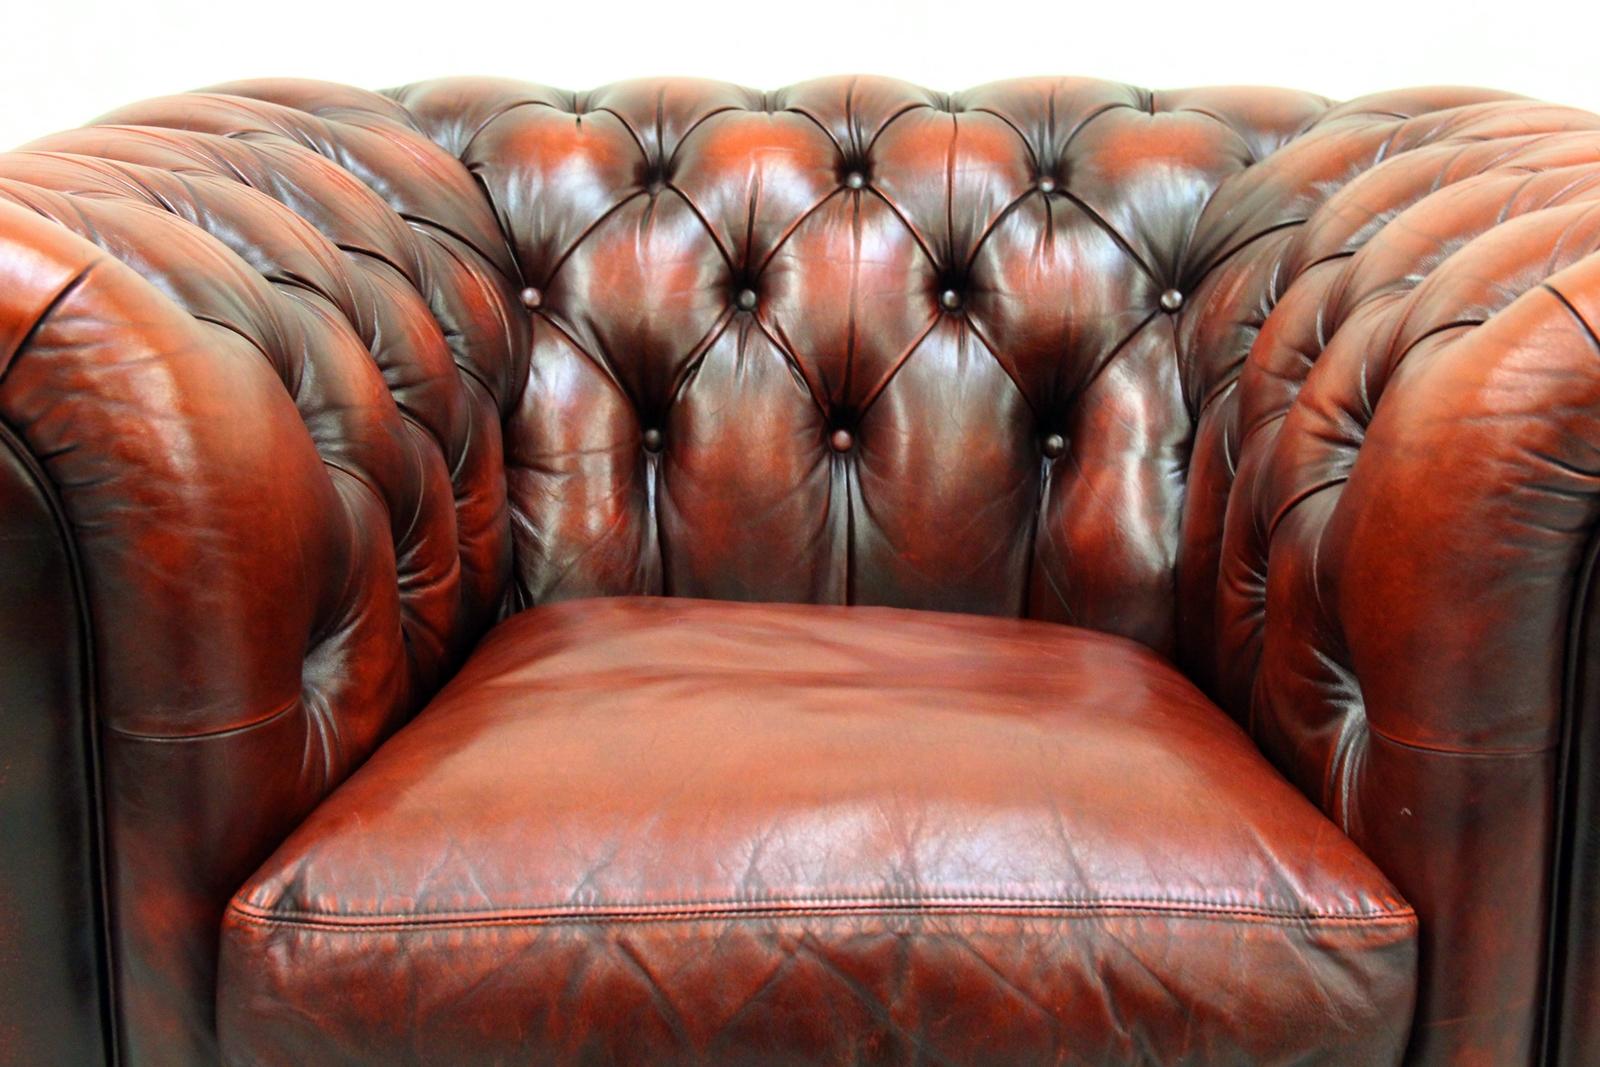 Chesterfield real leather armchair
in original design.

Condition: The armchairs are in a very good condition.
Measures: Armchair
Height x 72cm, length x 105cm, depth x 90cm
Upholstery is in a very good condition with beautiful patina (see